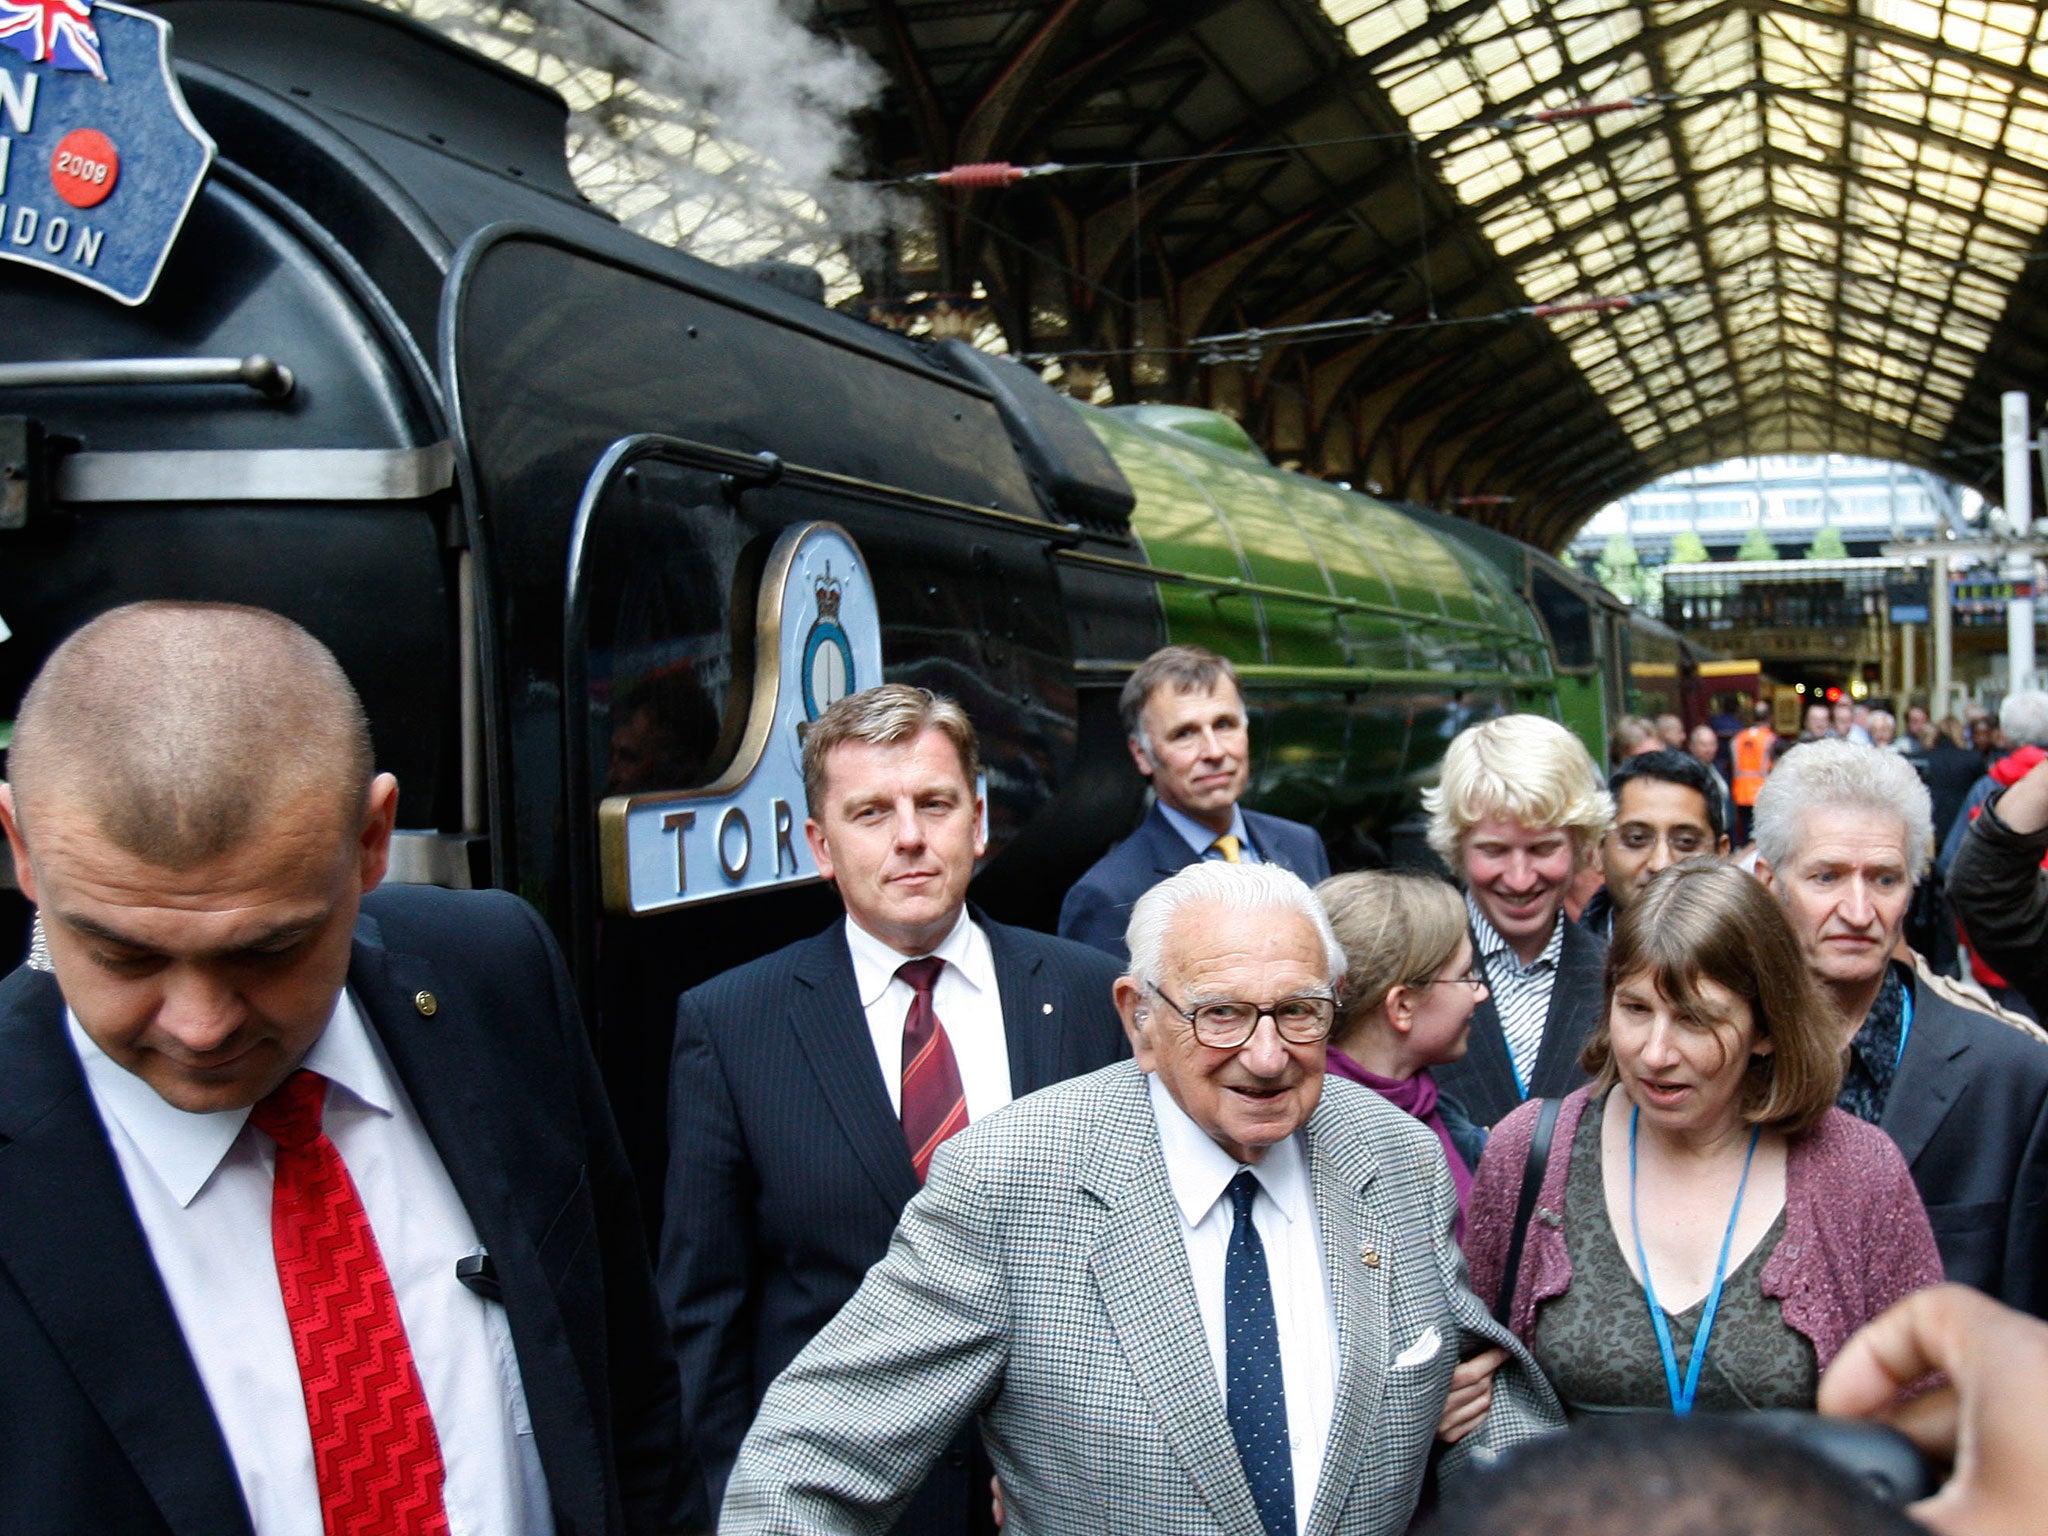 Nicholas Winton, centre, who organized the Winton Train rescue of children 70 years ago at Liverpool Street station